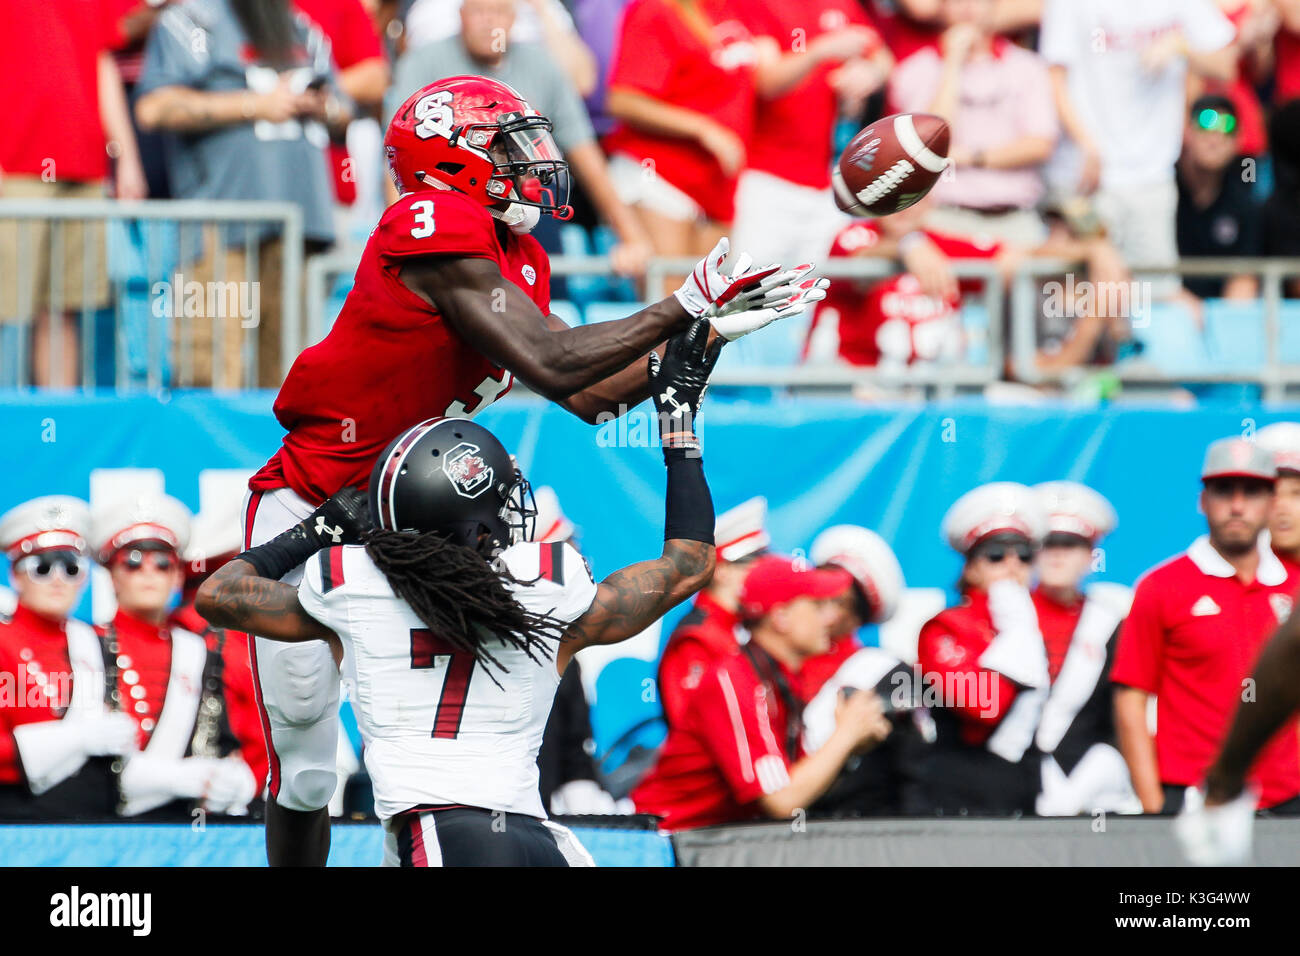 Charlotte, NC, USA. 2nd Sep, 2017. Kelvin Harmon (3) of the NC State Wolfpack makes the catch over JaMarcus King (7) of the South Carolina Gamecocks to setup the game tying touchdown before halftime of the NCAA football matchup between the NC State Wolfpack and the South Carolina Gamecocks at Bank of America Stadium in Charlotte, NC. (Scott Kinser/Cal Sport Media) Credit: csm/Alamy Live News Stock Photo